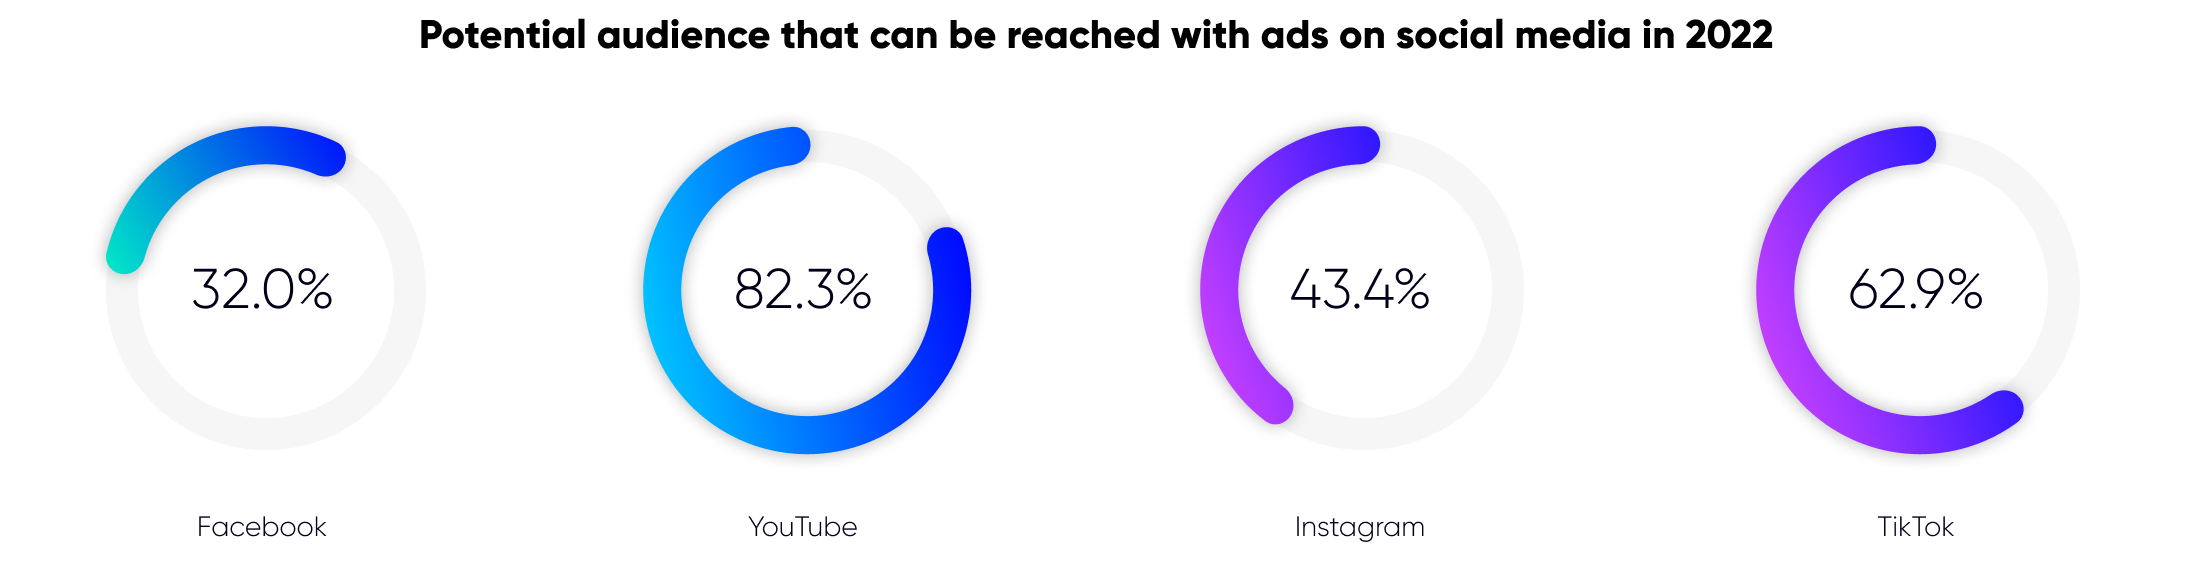 Potential audience that can be reached with ads on social media in Saudi Arabia